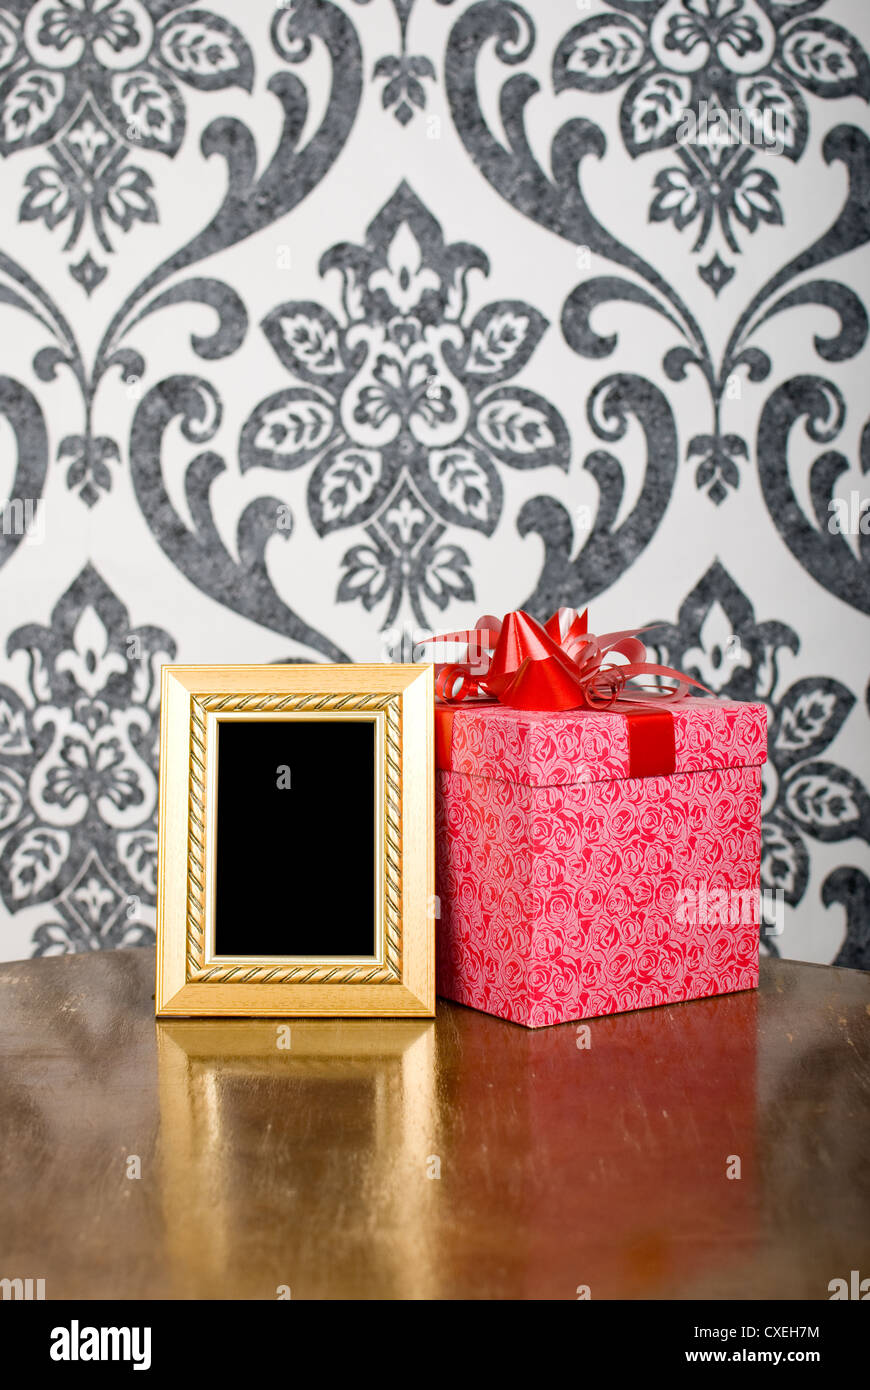 Golden photo frame and present box on table Stock Photo